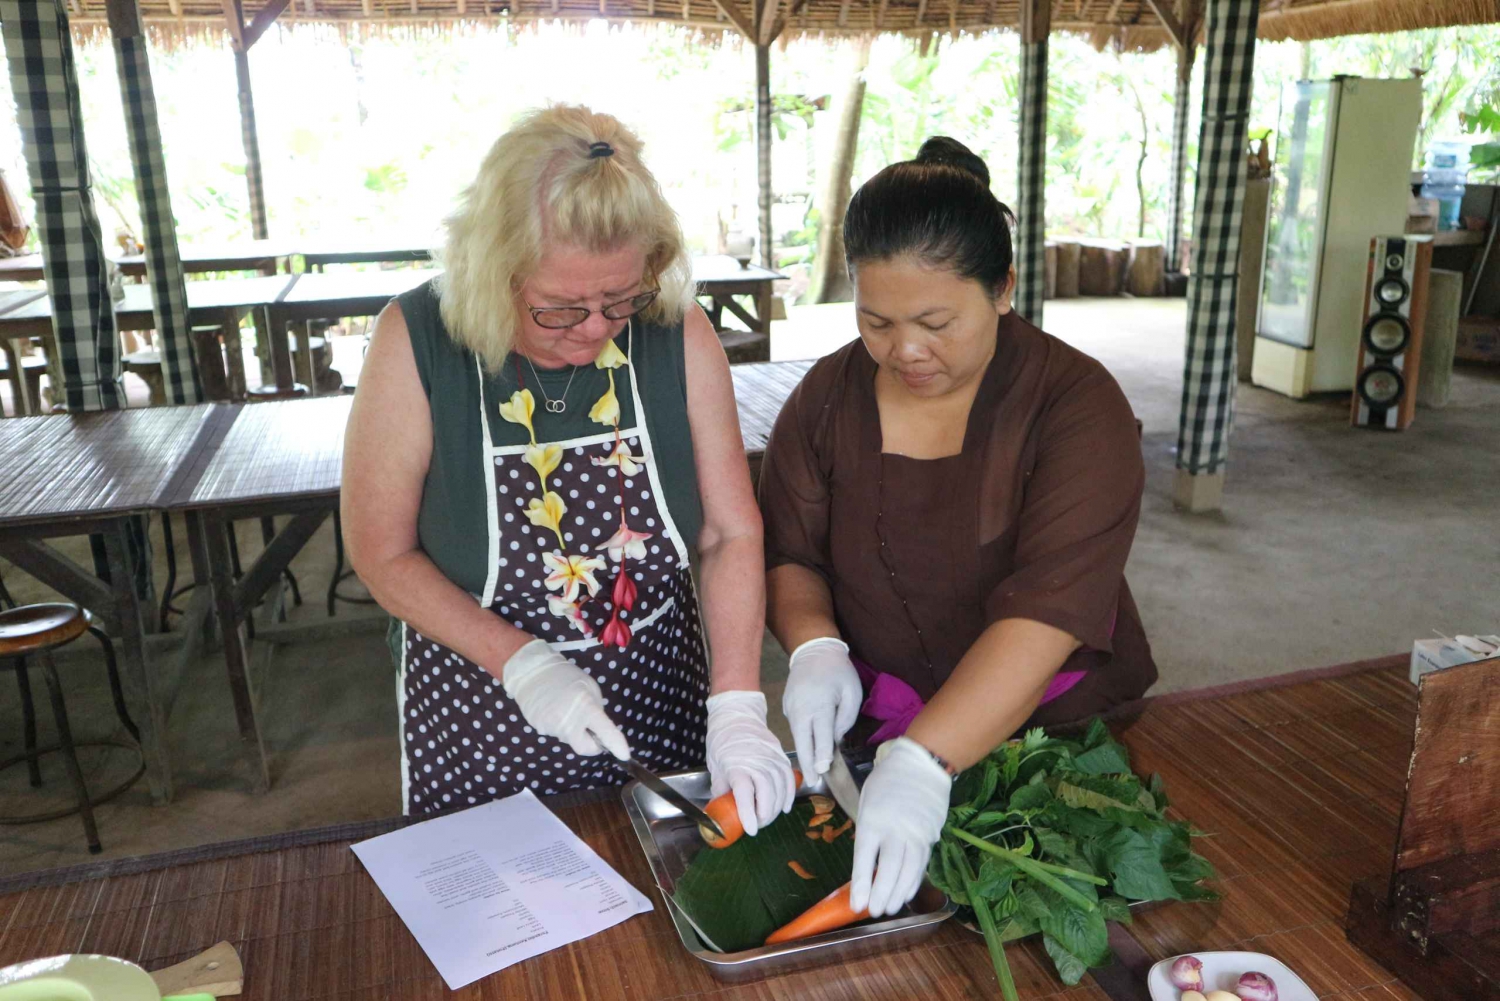 Bali: Balinese Culture and Cooking Class Private Trip